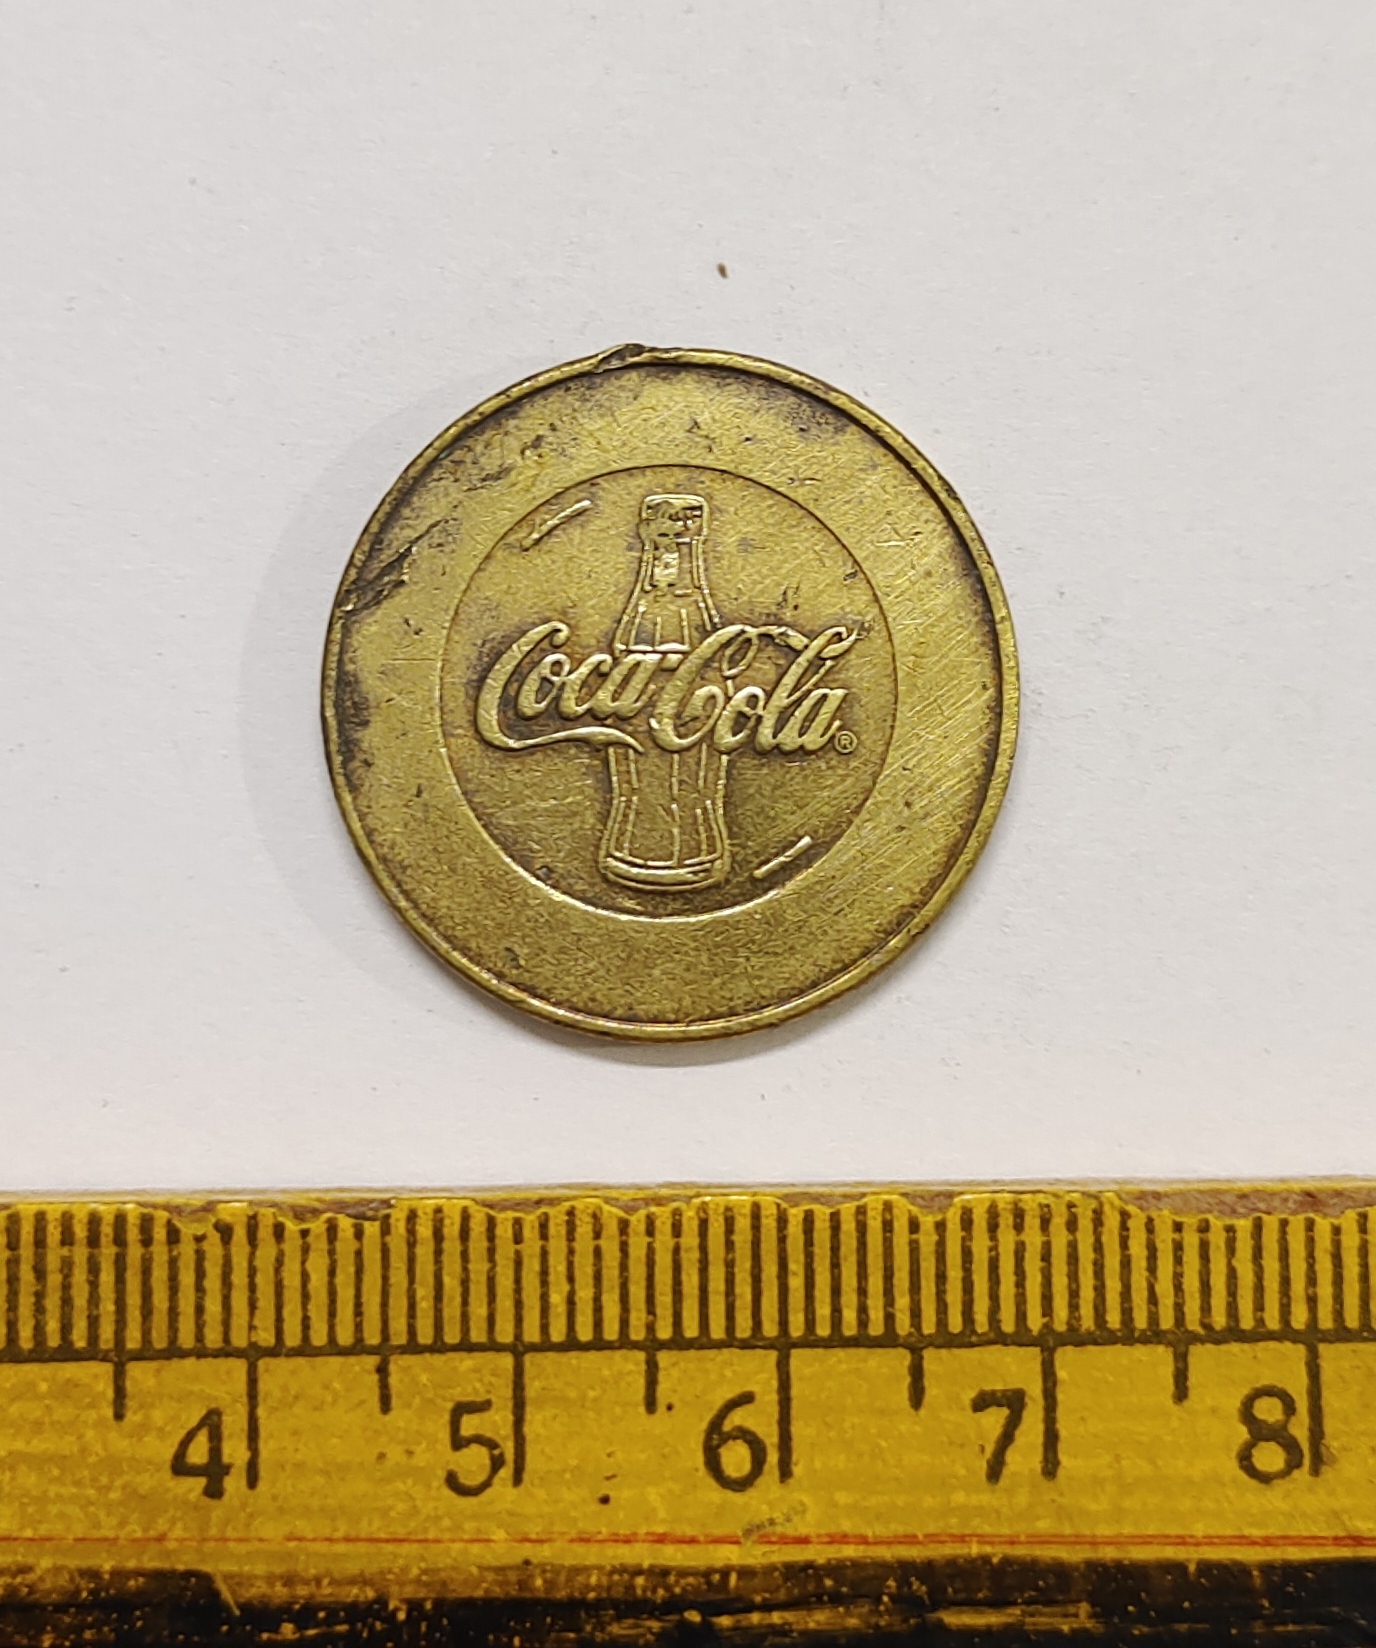 Rare vintage brass Token of Coca Cola , Value one Drink , small size .